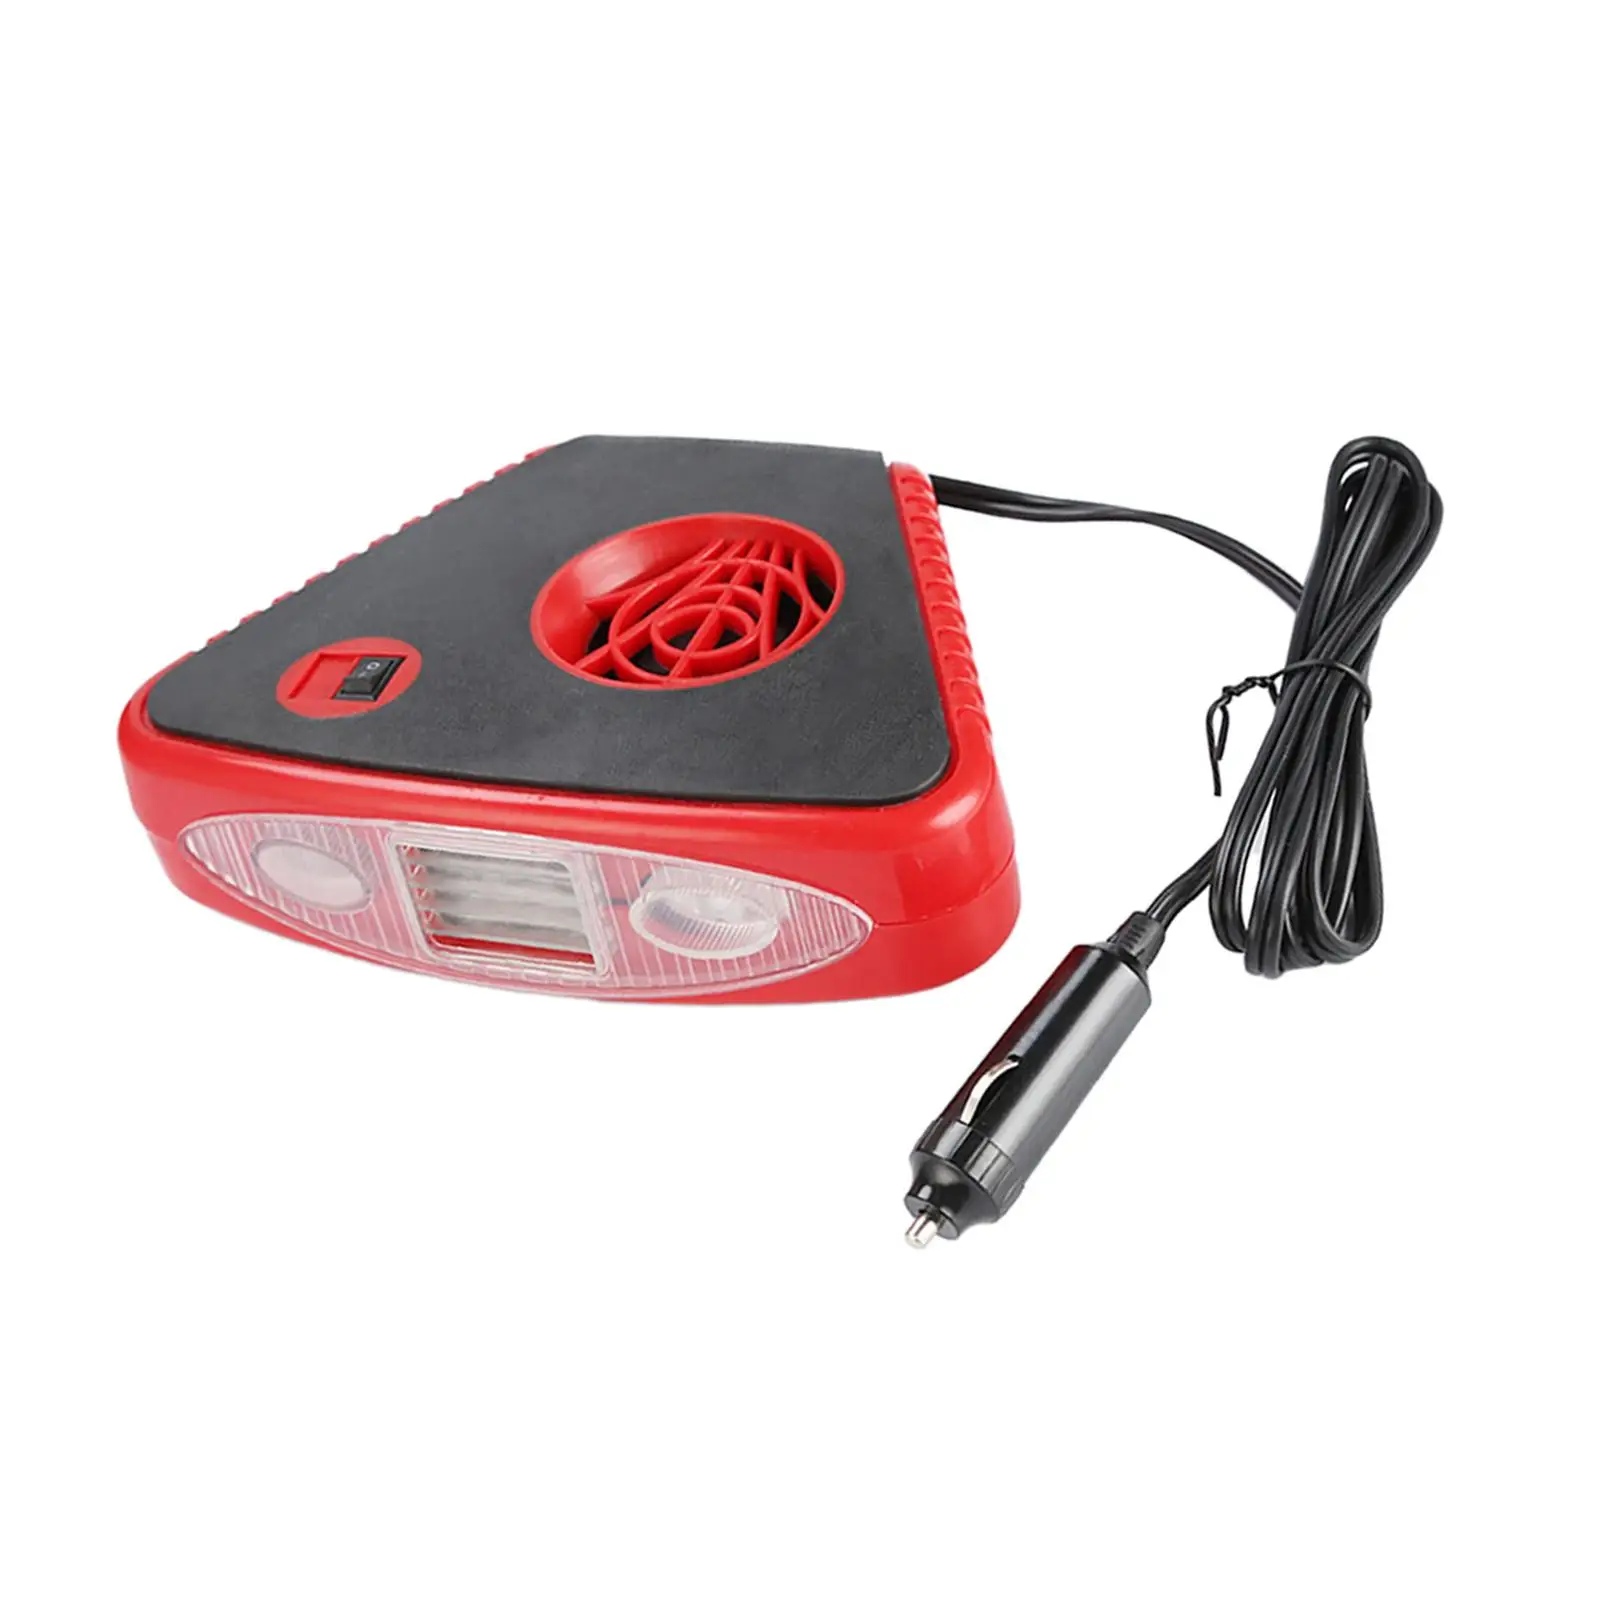 Portable 12V 150W Car Heater Fan with Light for Vehicles in Winter